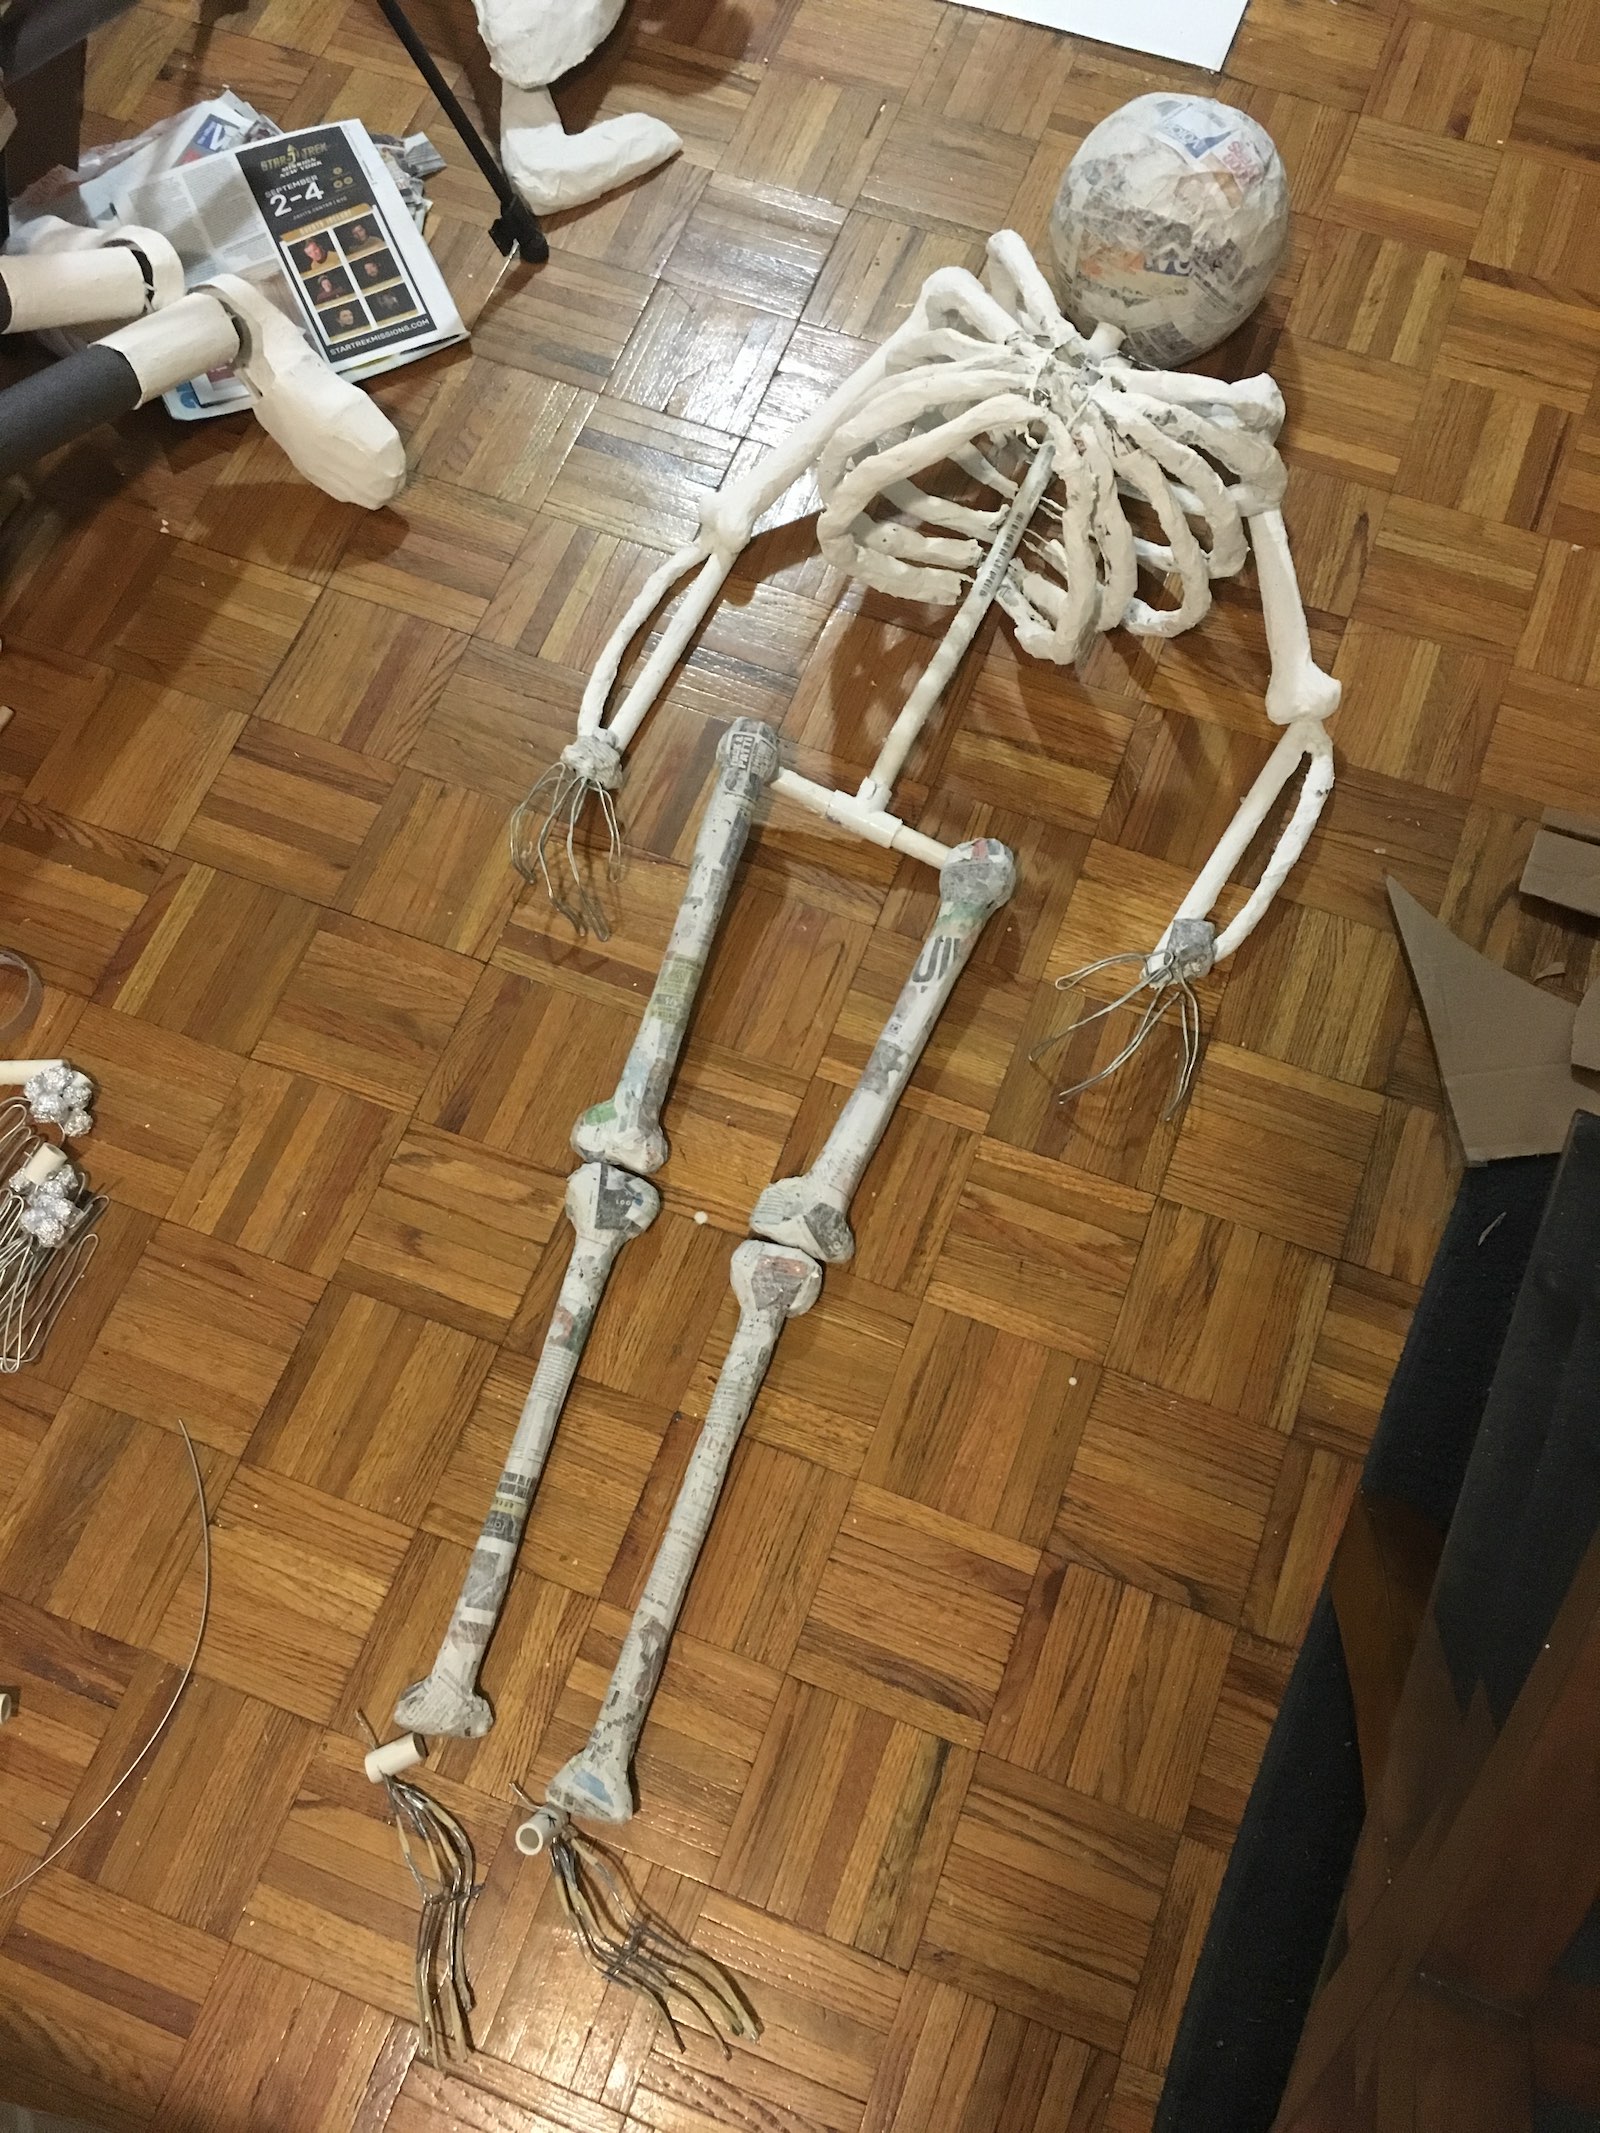 Most of one of the skeletons, laid out on the floor